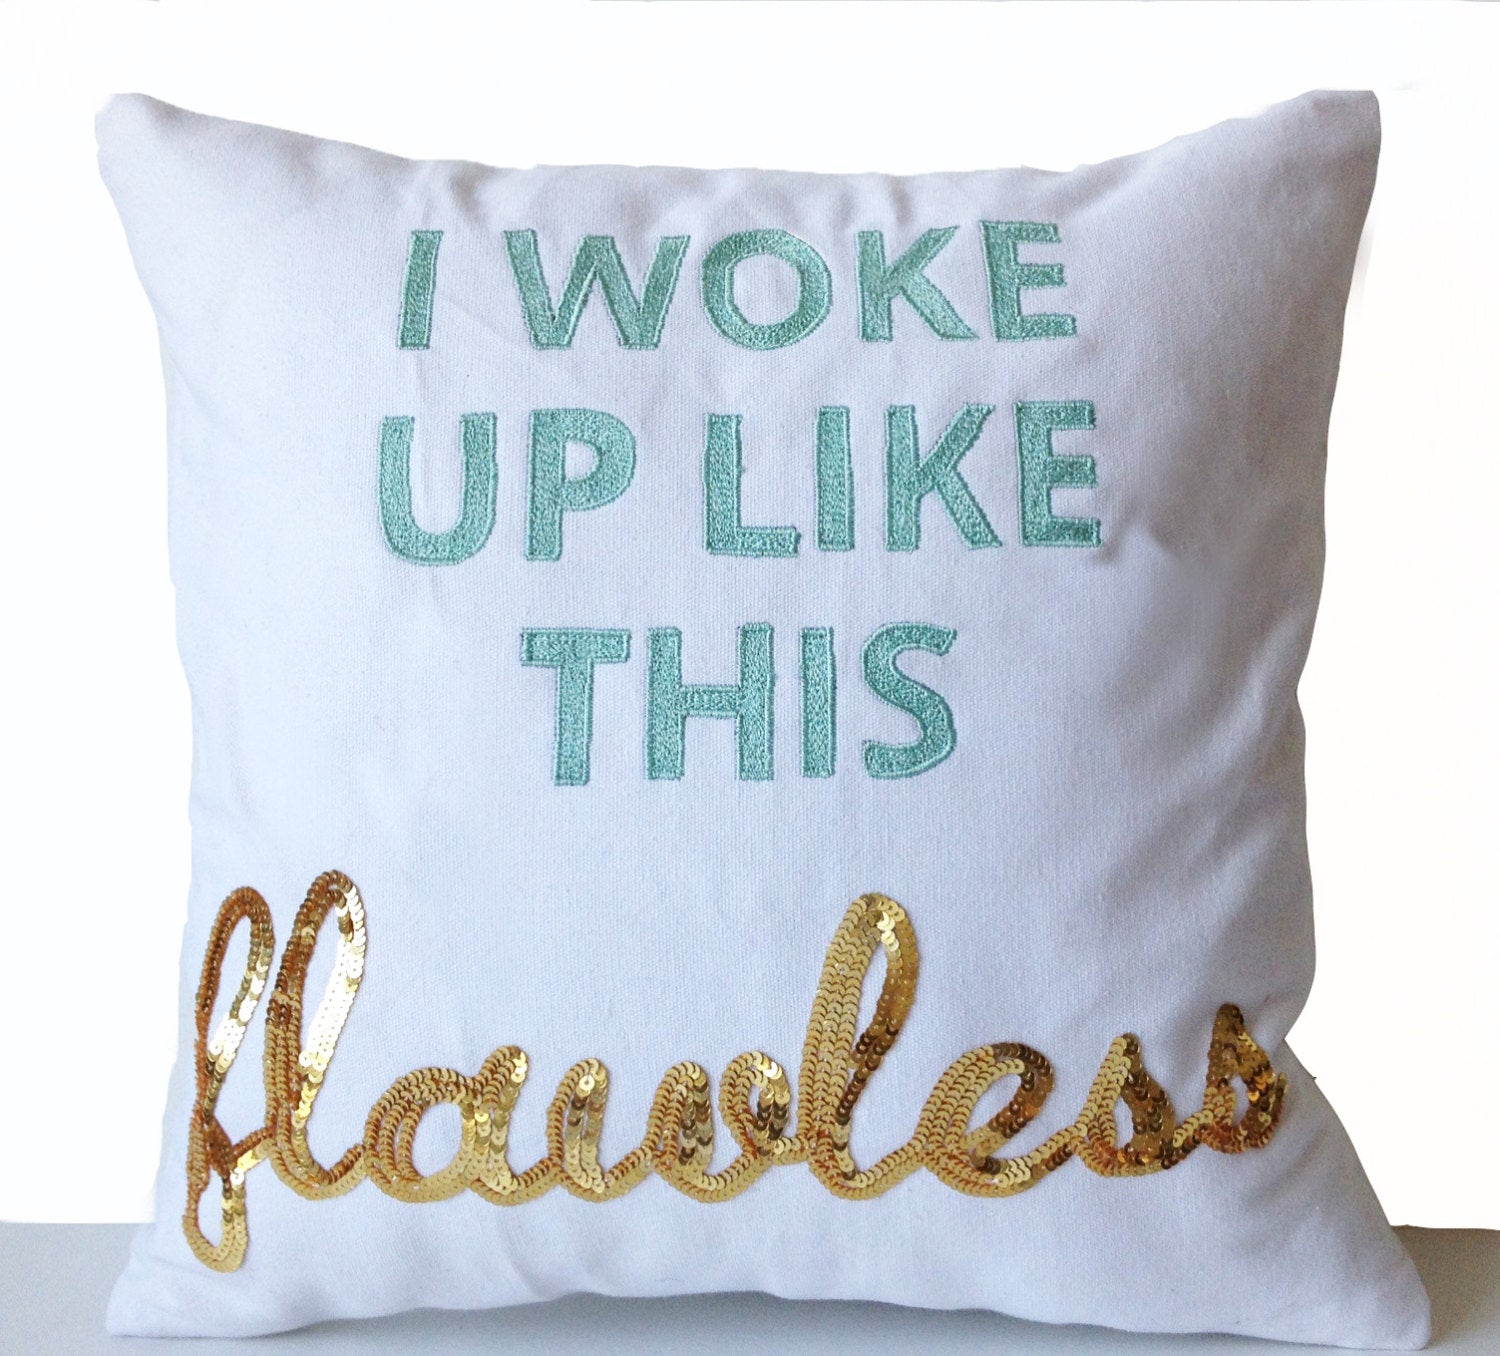 amore beaute quote pillow